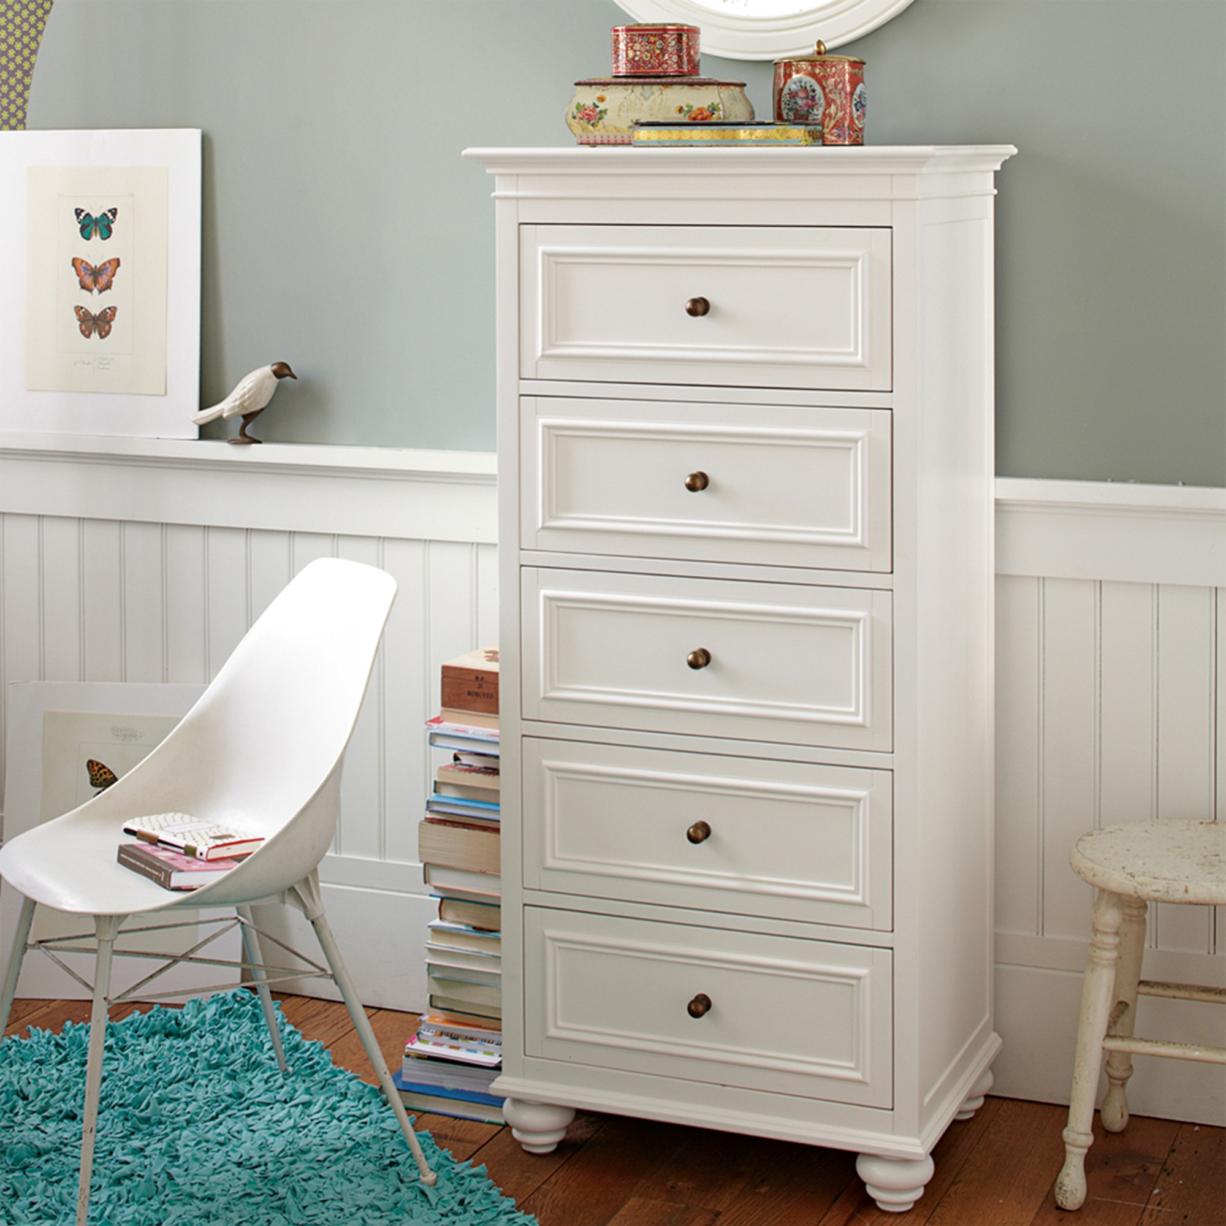 Dressers For Small Places High Narrow, Long Short Bedroom Dresser